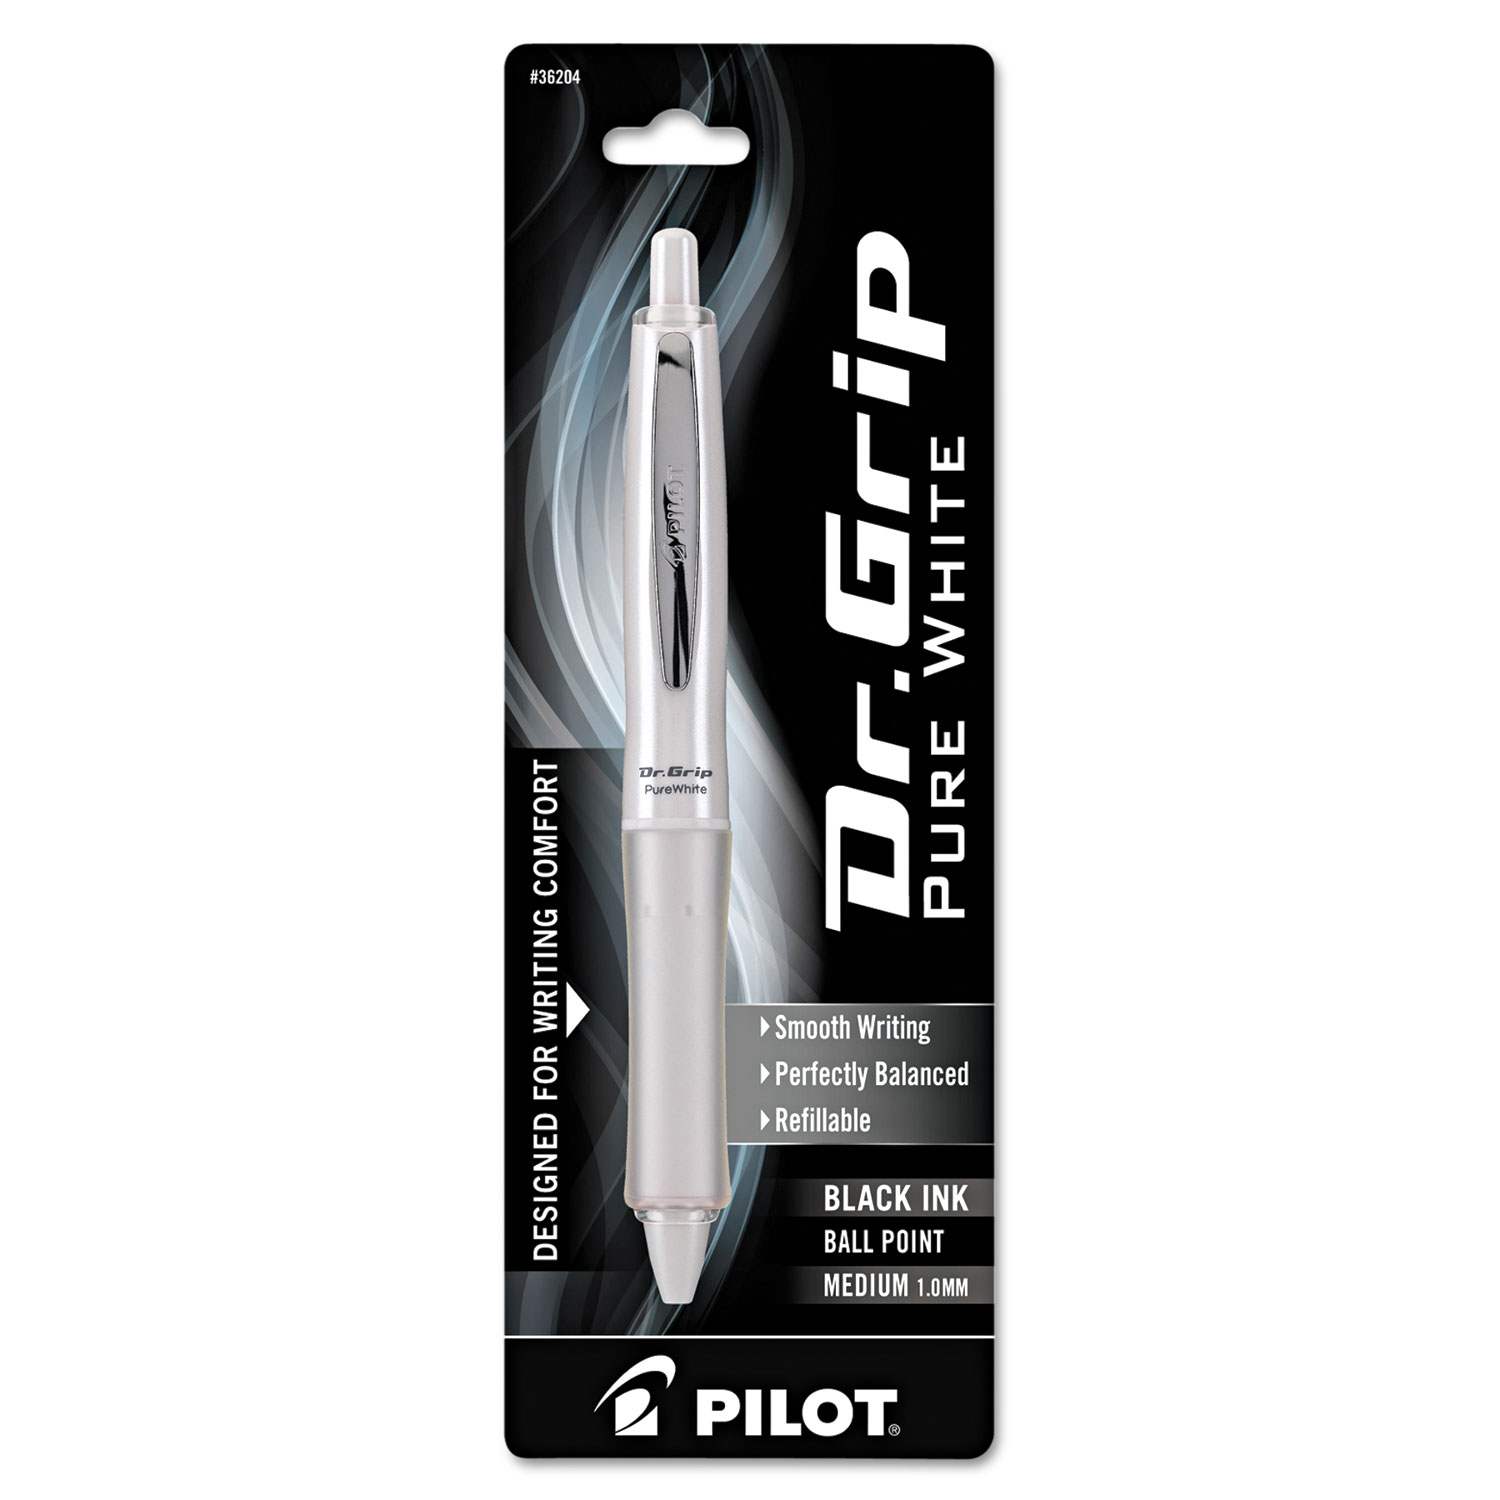 Dr. Grip PureWhite Advanced Ink Retractable Ball Point Pen, Black Ink, 1mm